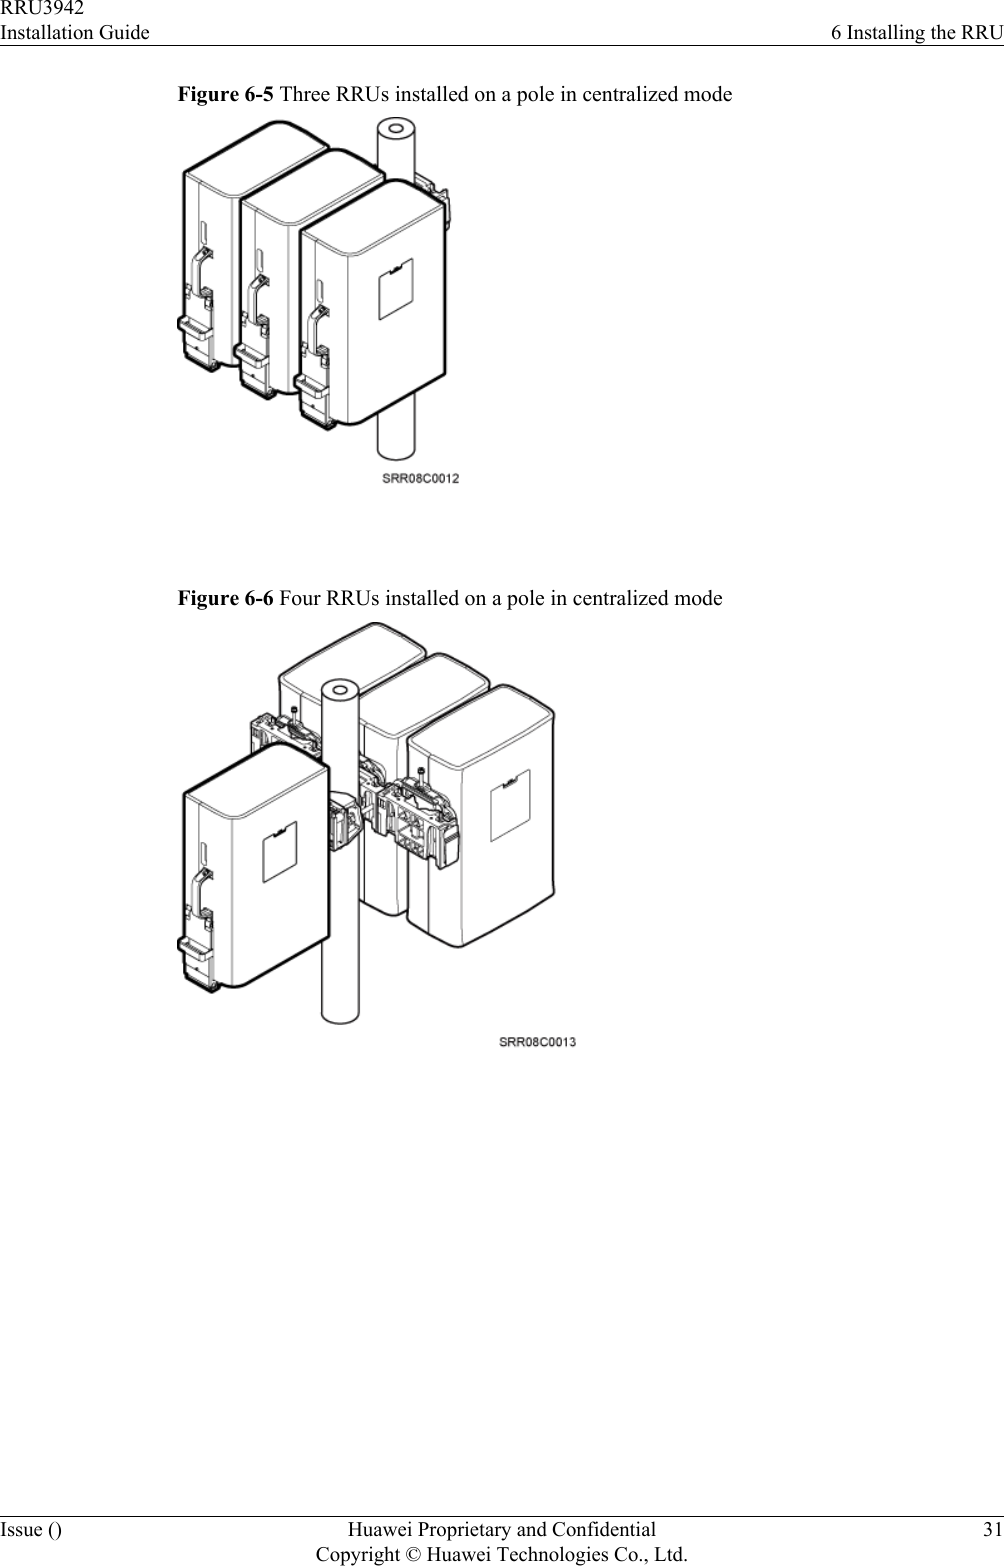 Figure 6-5 Three RRUs installed on a pole in centralized mode Figure 6-6 Four RRUs installed on a pole in centralized mode RRU3942Installation Guide 6 Installing the RRUIssue () Huawei Proprietary and ConfidentialCopyright © Huawei Technologies Co., Ltd.31